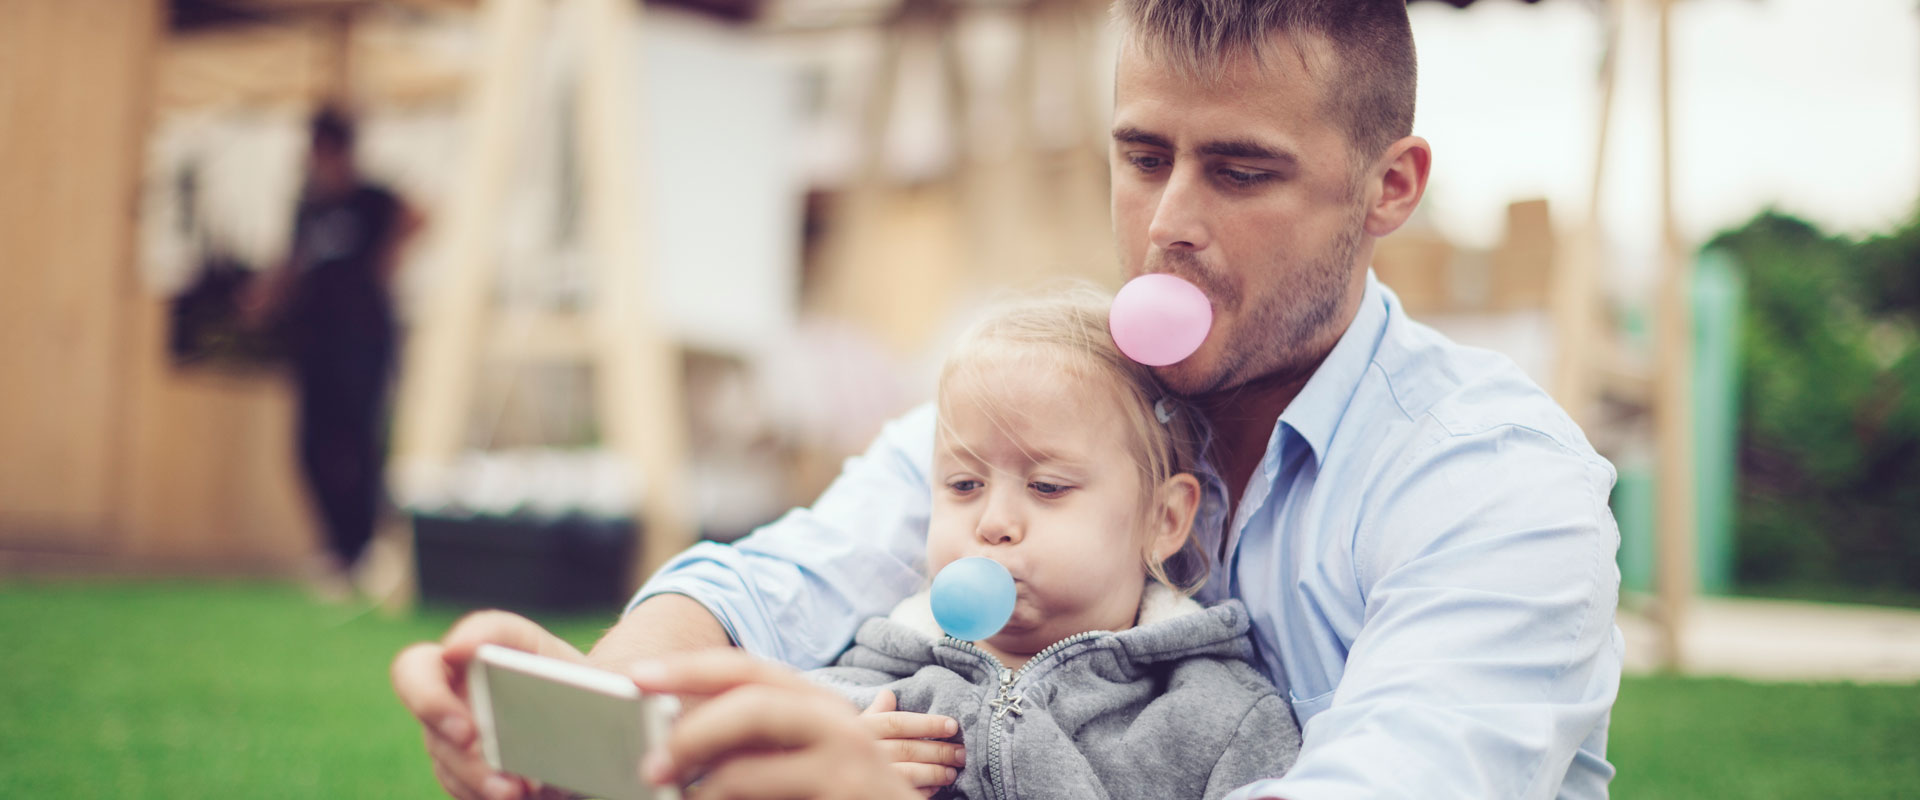 father and young daughter blowing bubblegum bubbles for selfie picture